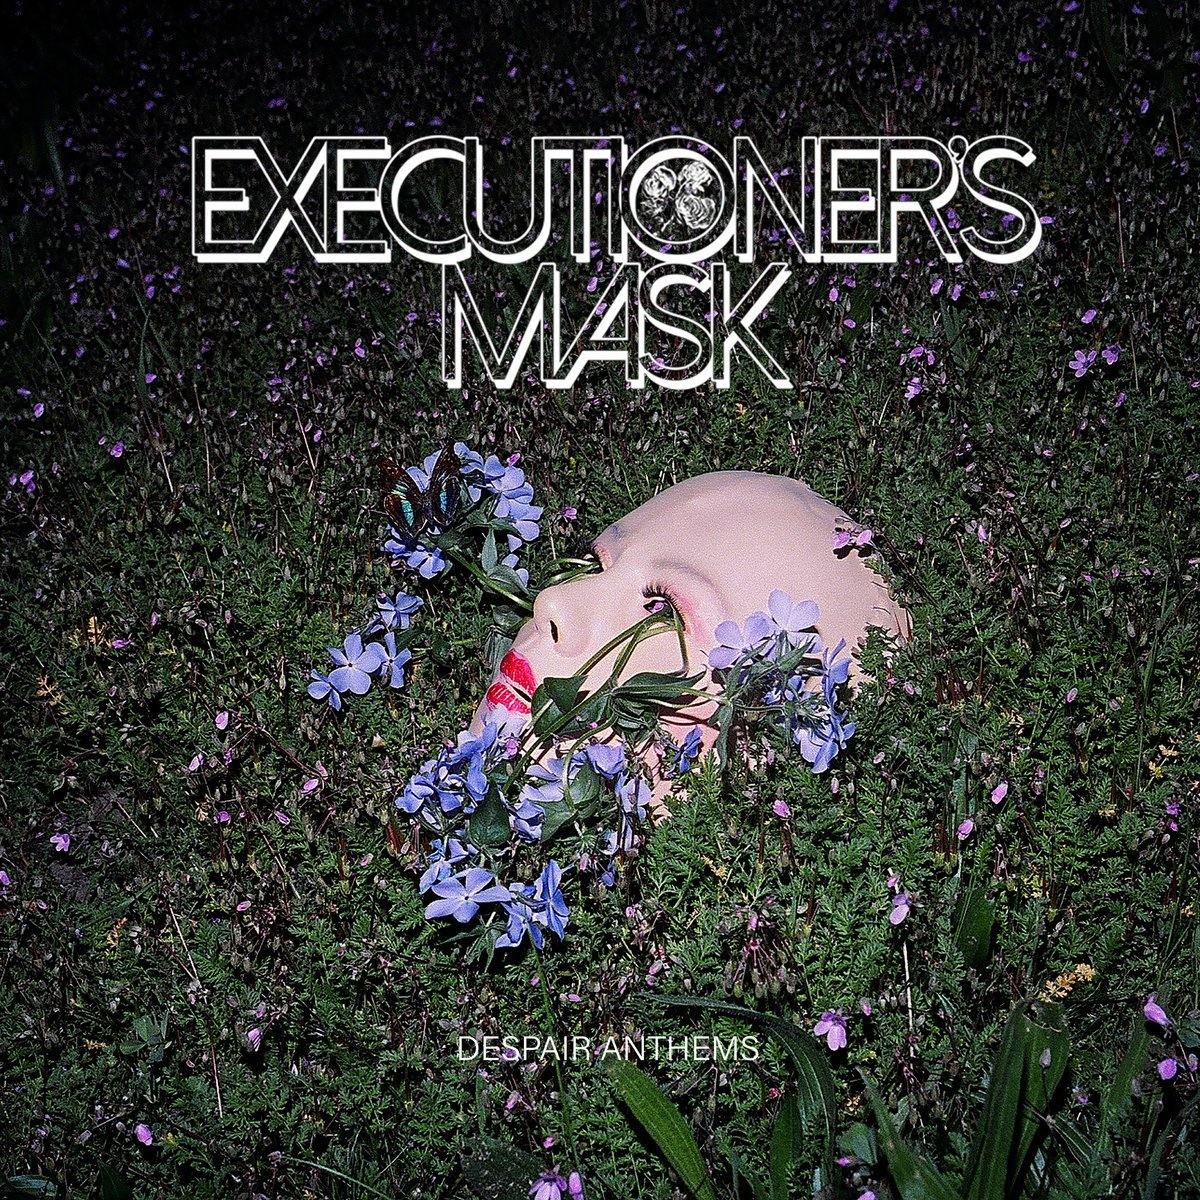 Buy – Executioner's Mask "Despair Anthems" 12" – Band & Music Merch – Cold Cuts Merch